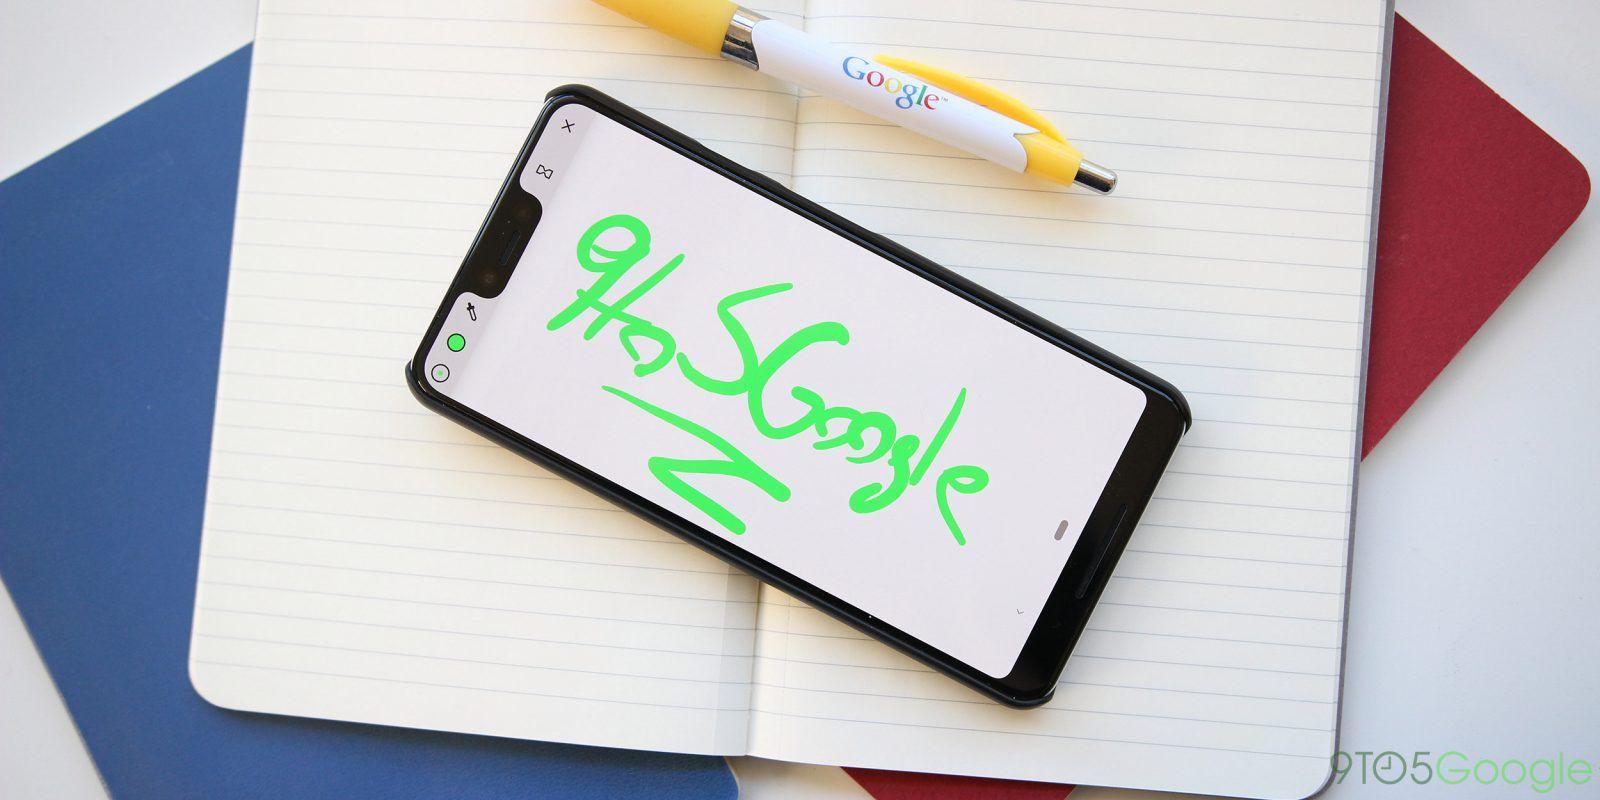 Google Pixel 3 Logo - Google Pixel 3 Easter Egg is a neat drawing pad [Video] - 9to5Google